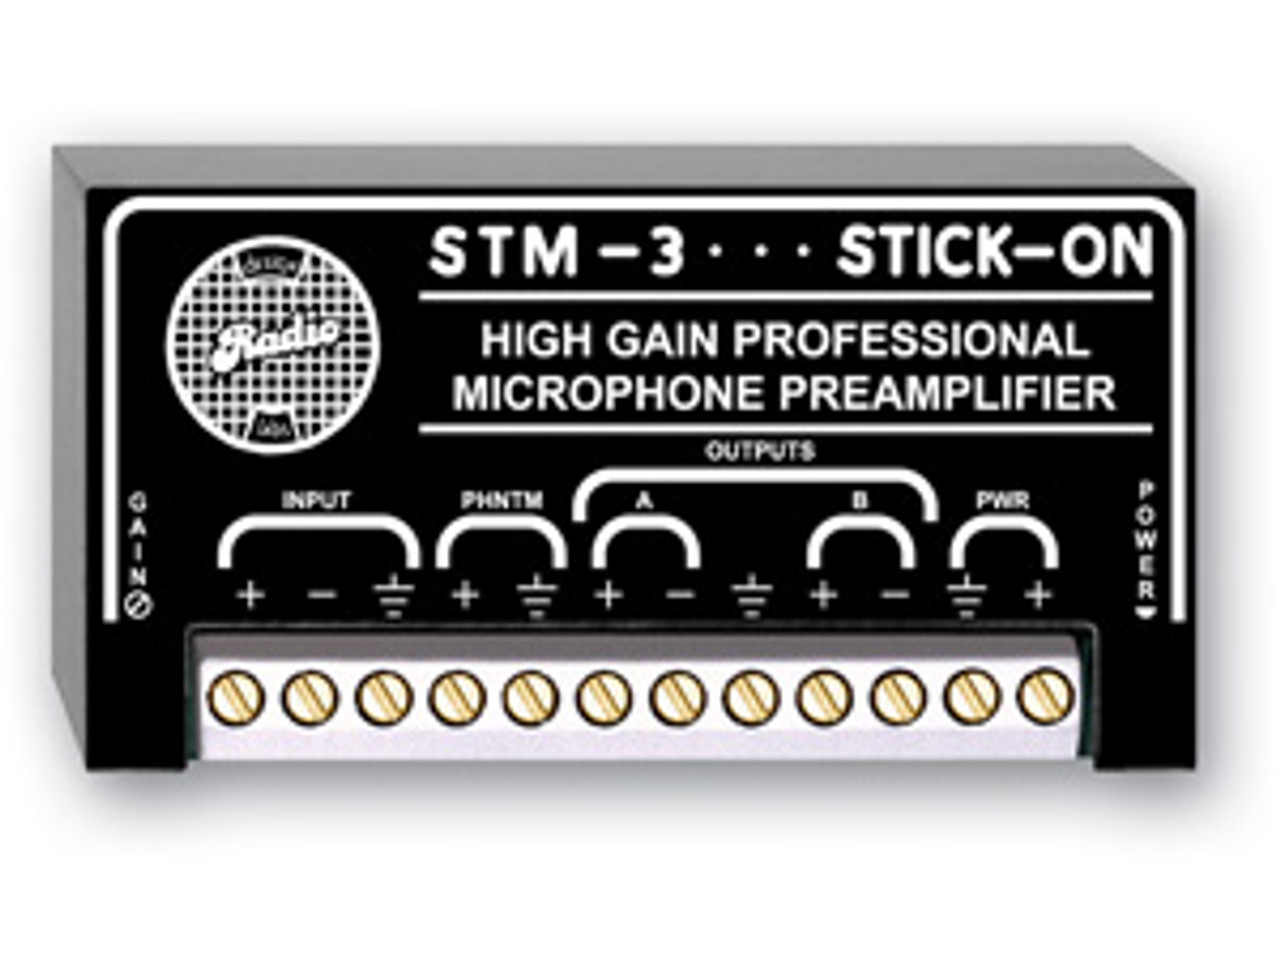 RDL STM-3 High Gain Microphone Preamplifier - 45 to 75 dB gain (STM-3)